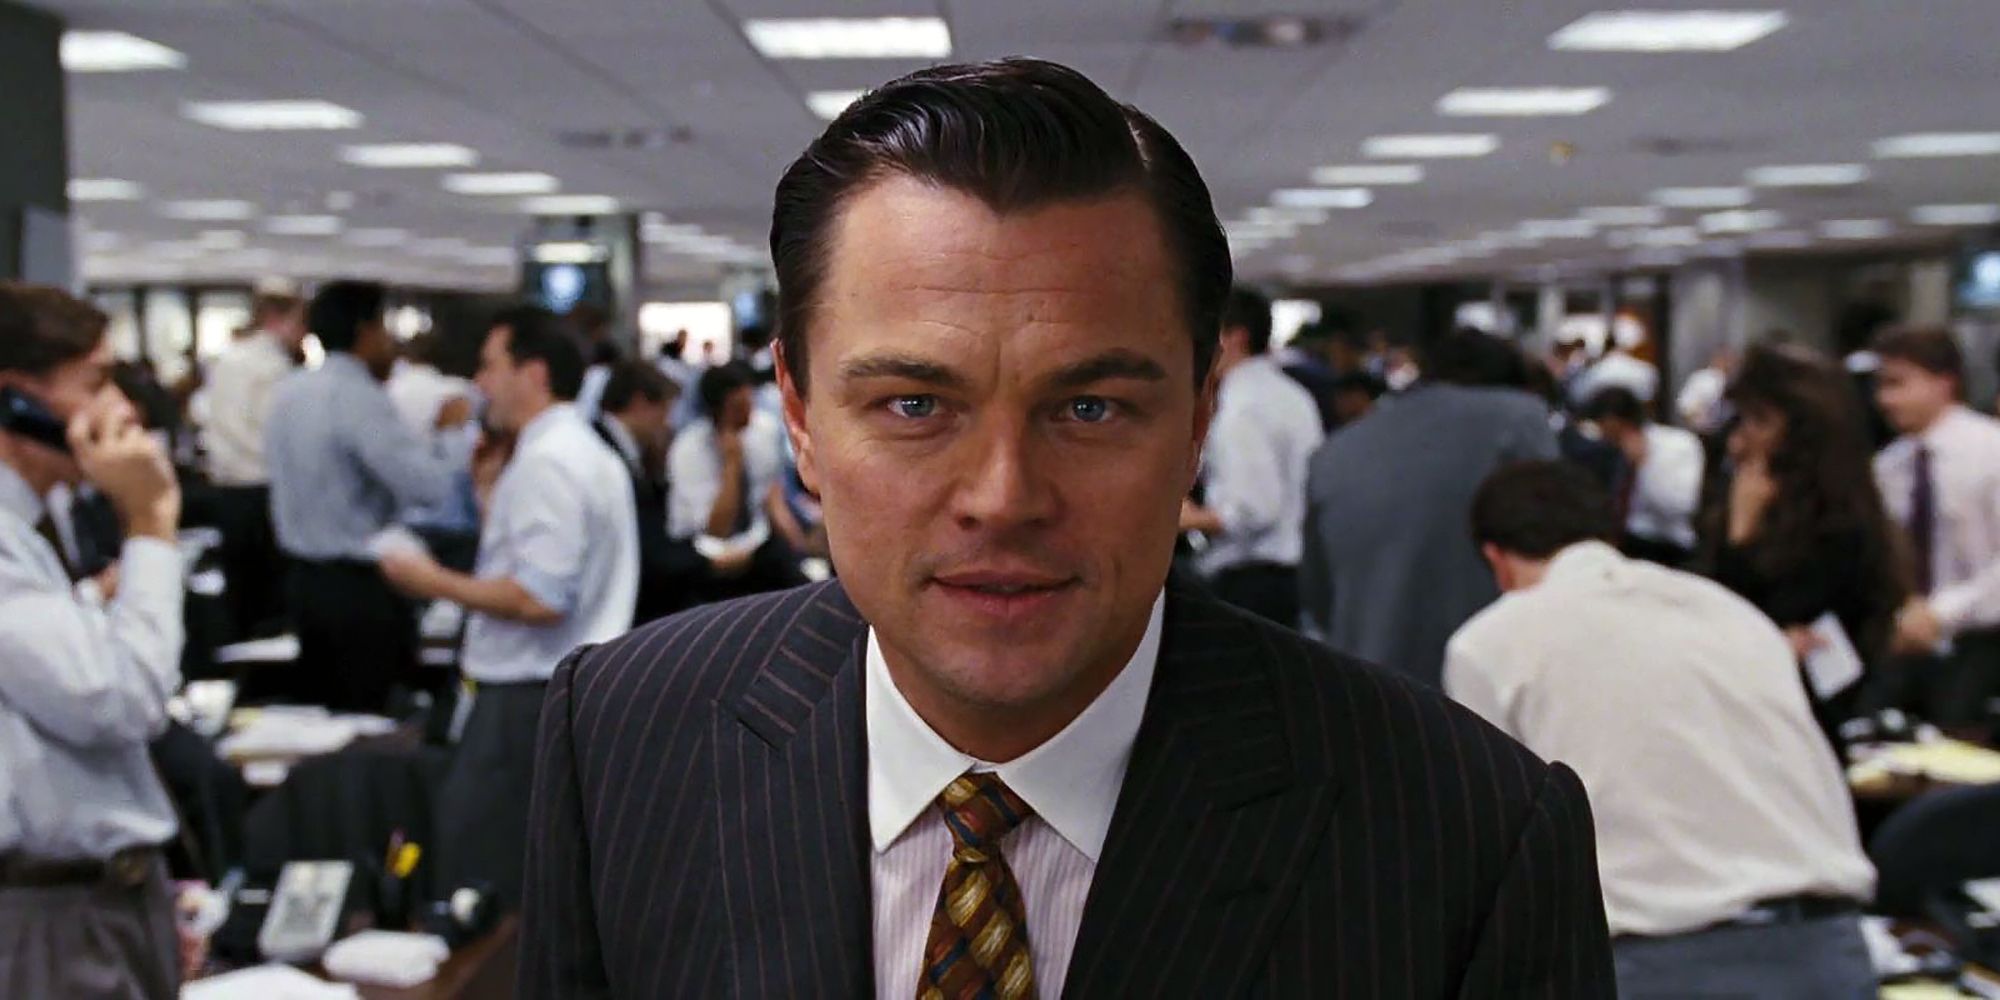 Leonardo DiCaprio's Jordan looks straight at the camera in The Wolf of Wall Street